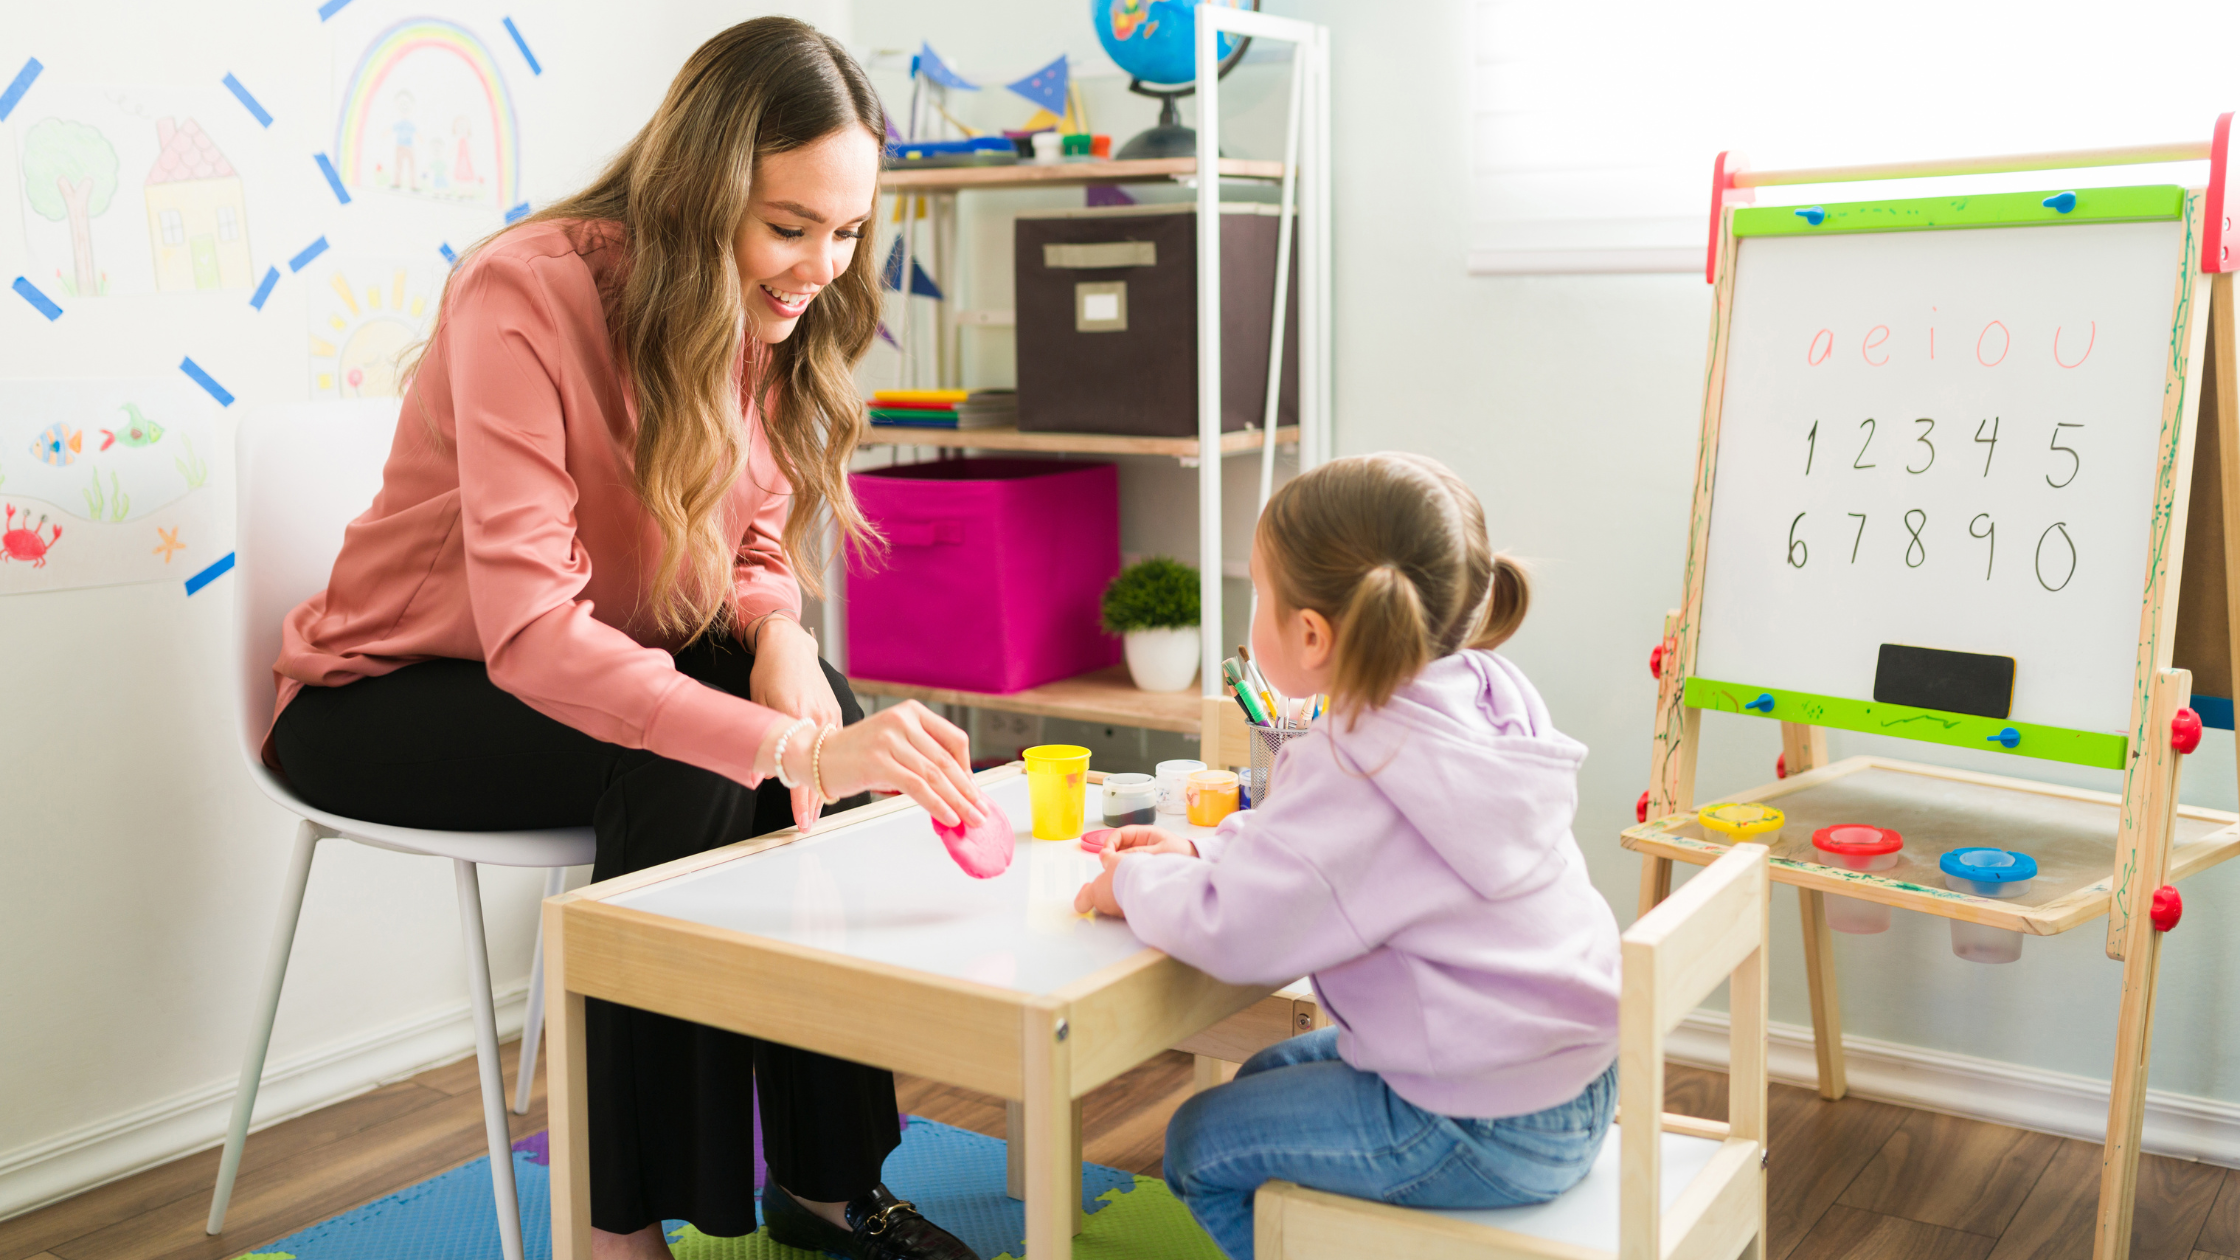 A Board Certified Behavior Analyst (BCBA) working with a child on play and social skills through ABA therapy.